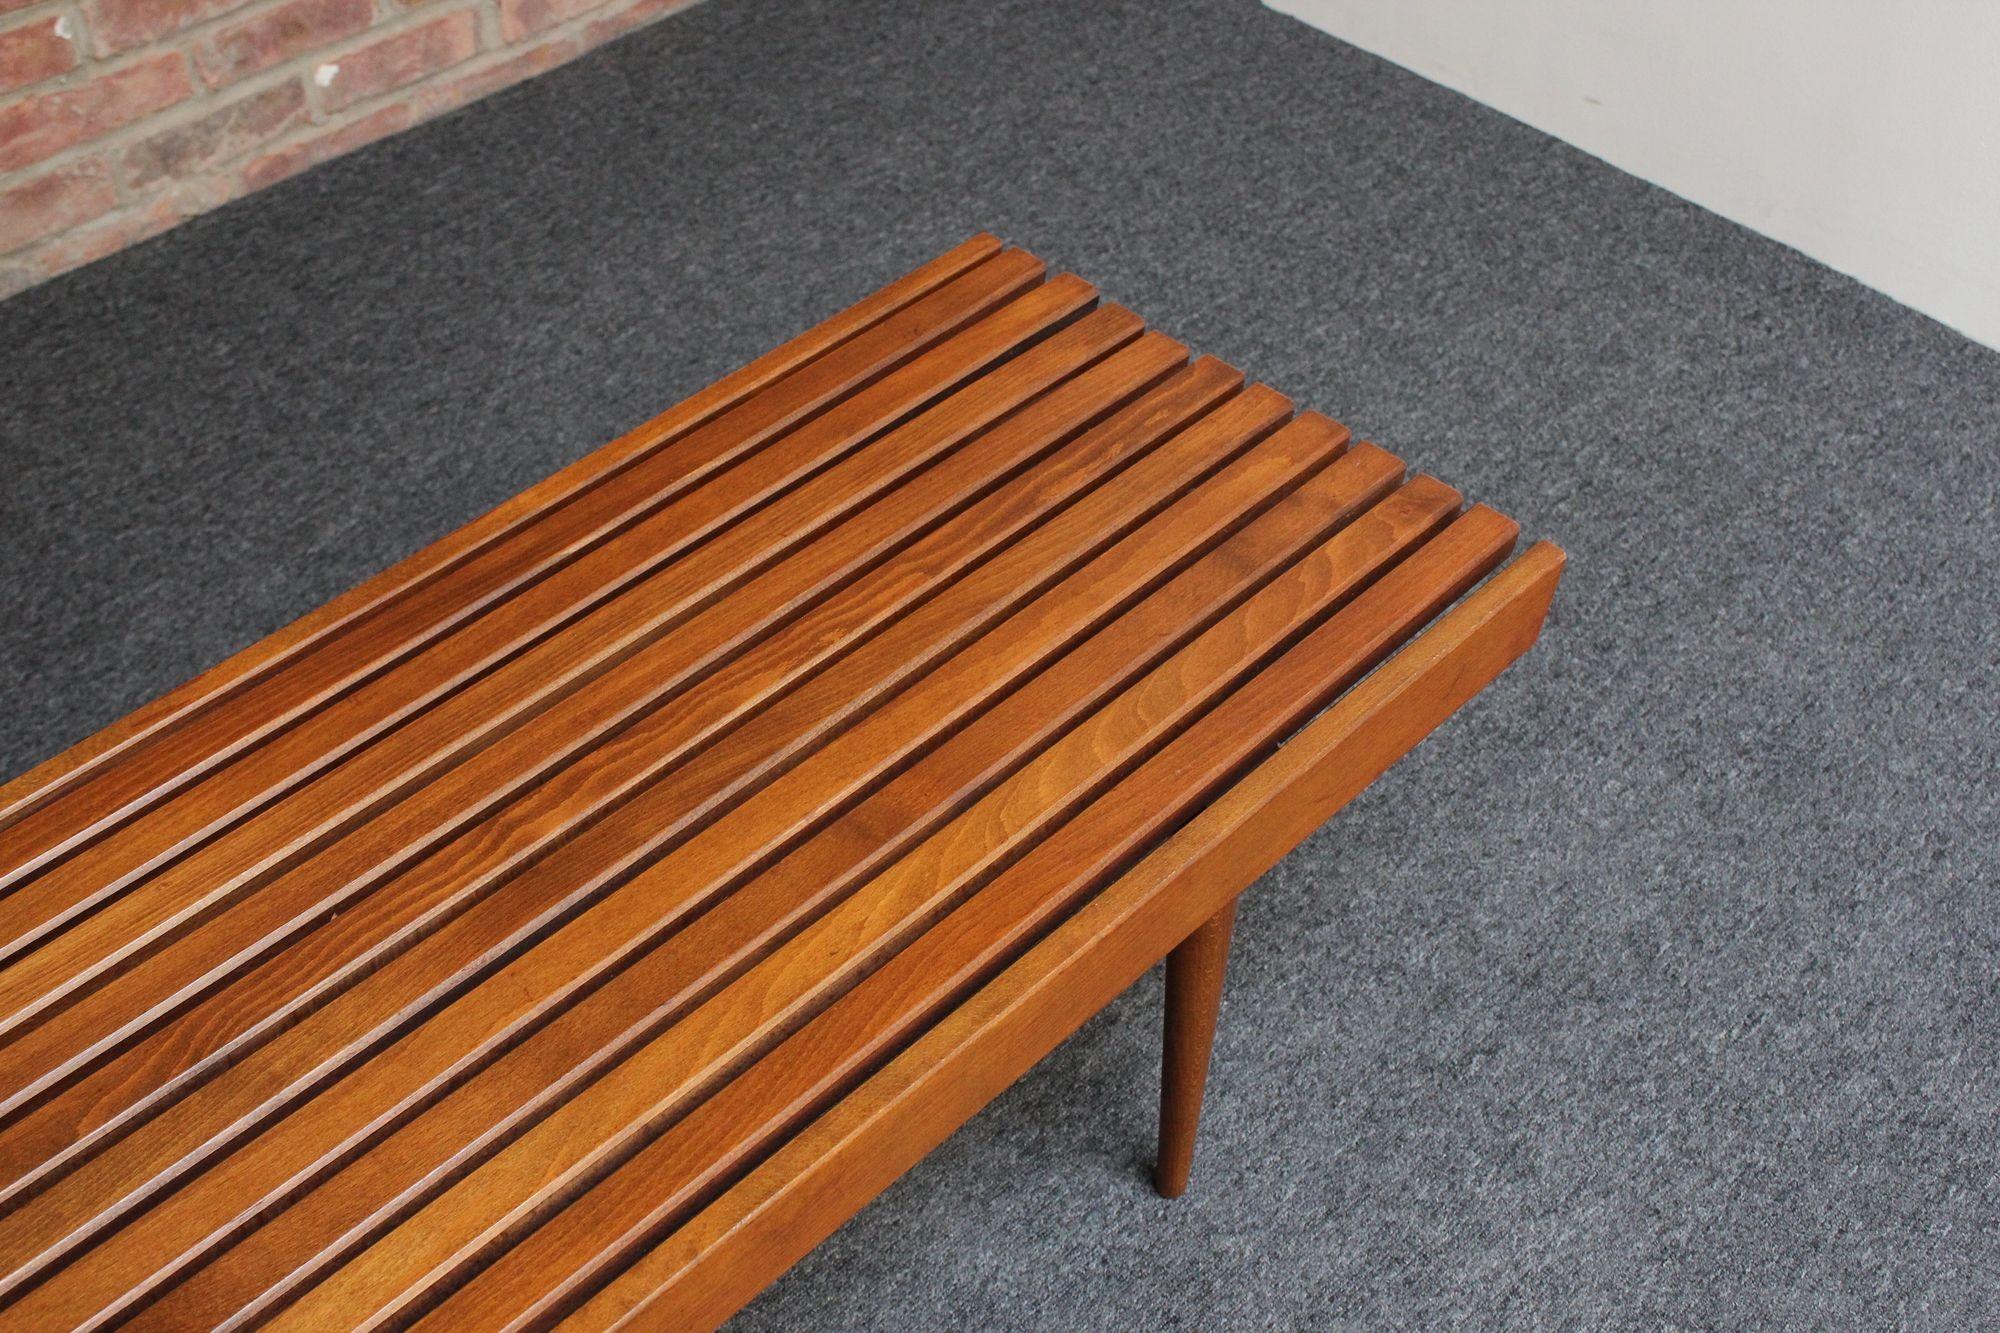 Long Mid-Century Modern Walnut Slatted Bench / Coffee Table with Tapered Legs For Sale 13